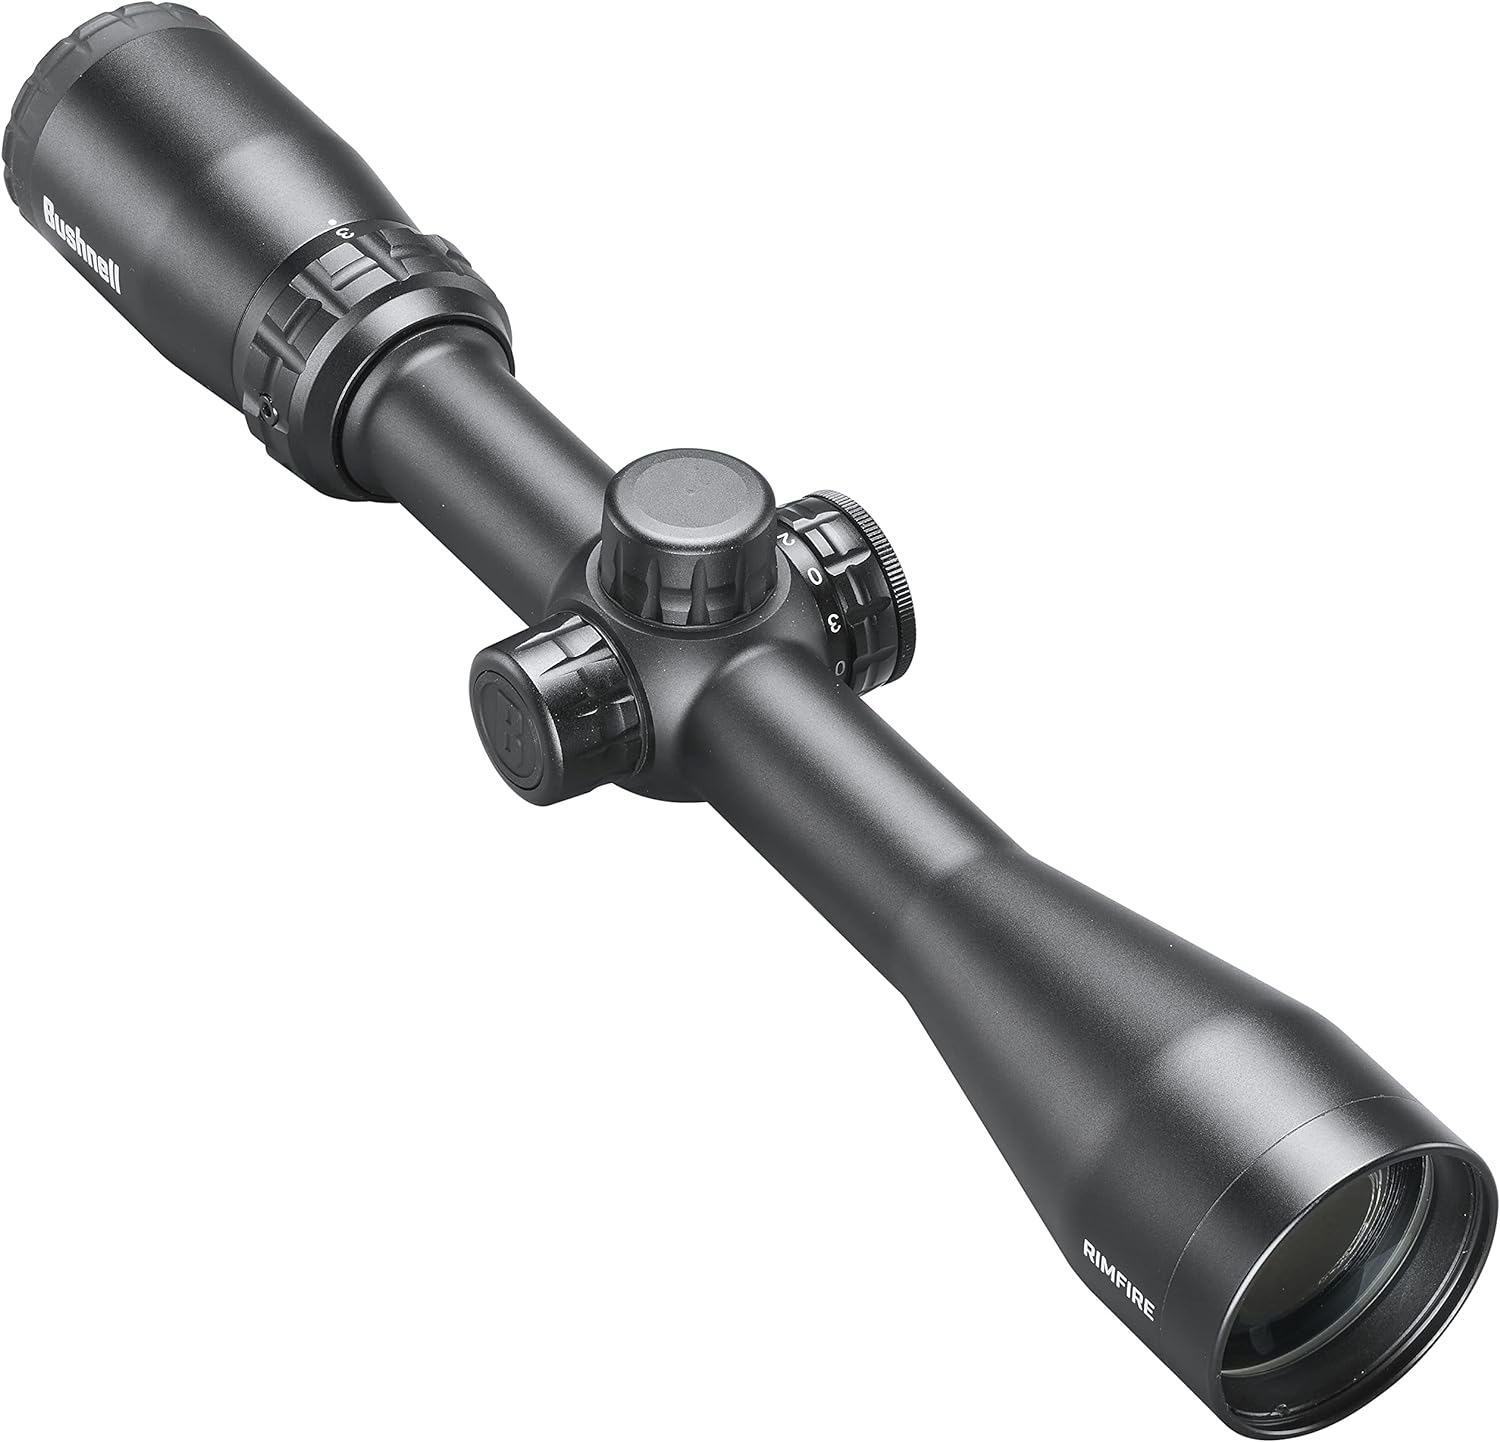 Bushnell Rimfire 3-9x40 Illuminated Riflescope, Hunting Riflescope with BDC Reticle Lightweight and Waterproof Sealed - Bushnell Rimfire 3-9x40 Illuminated Riflescope Review